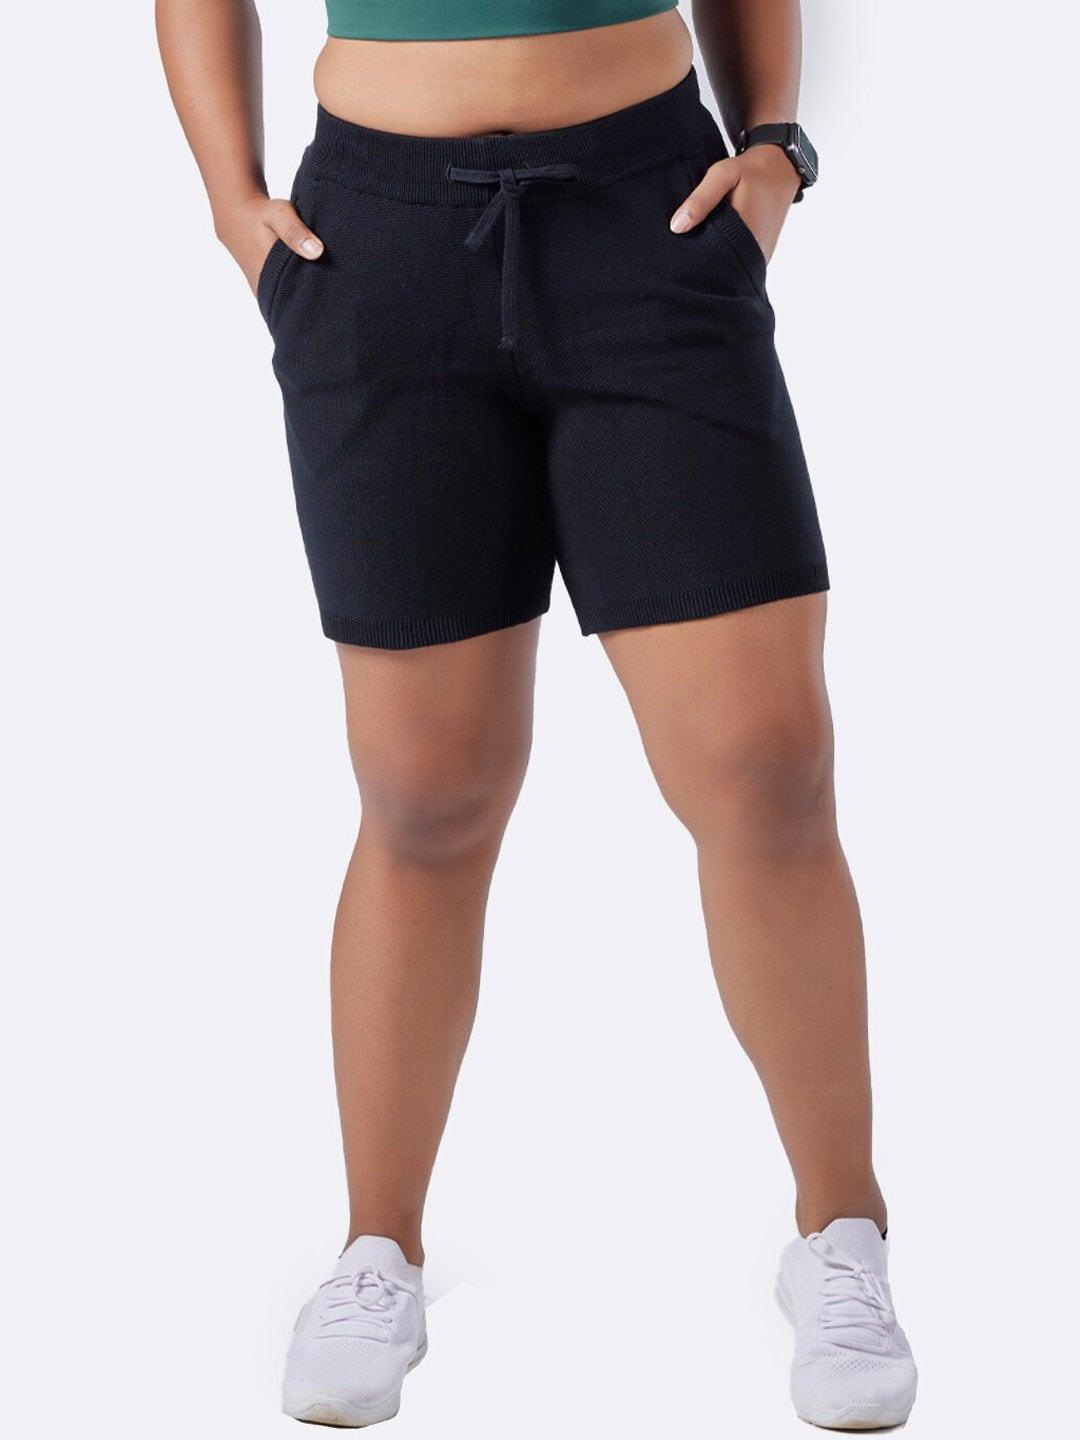 blissclub-women-black-move-all-day-pure-cotton-shorts